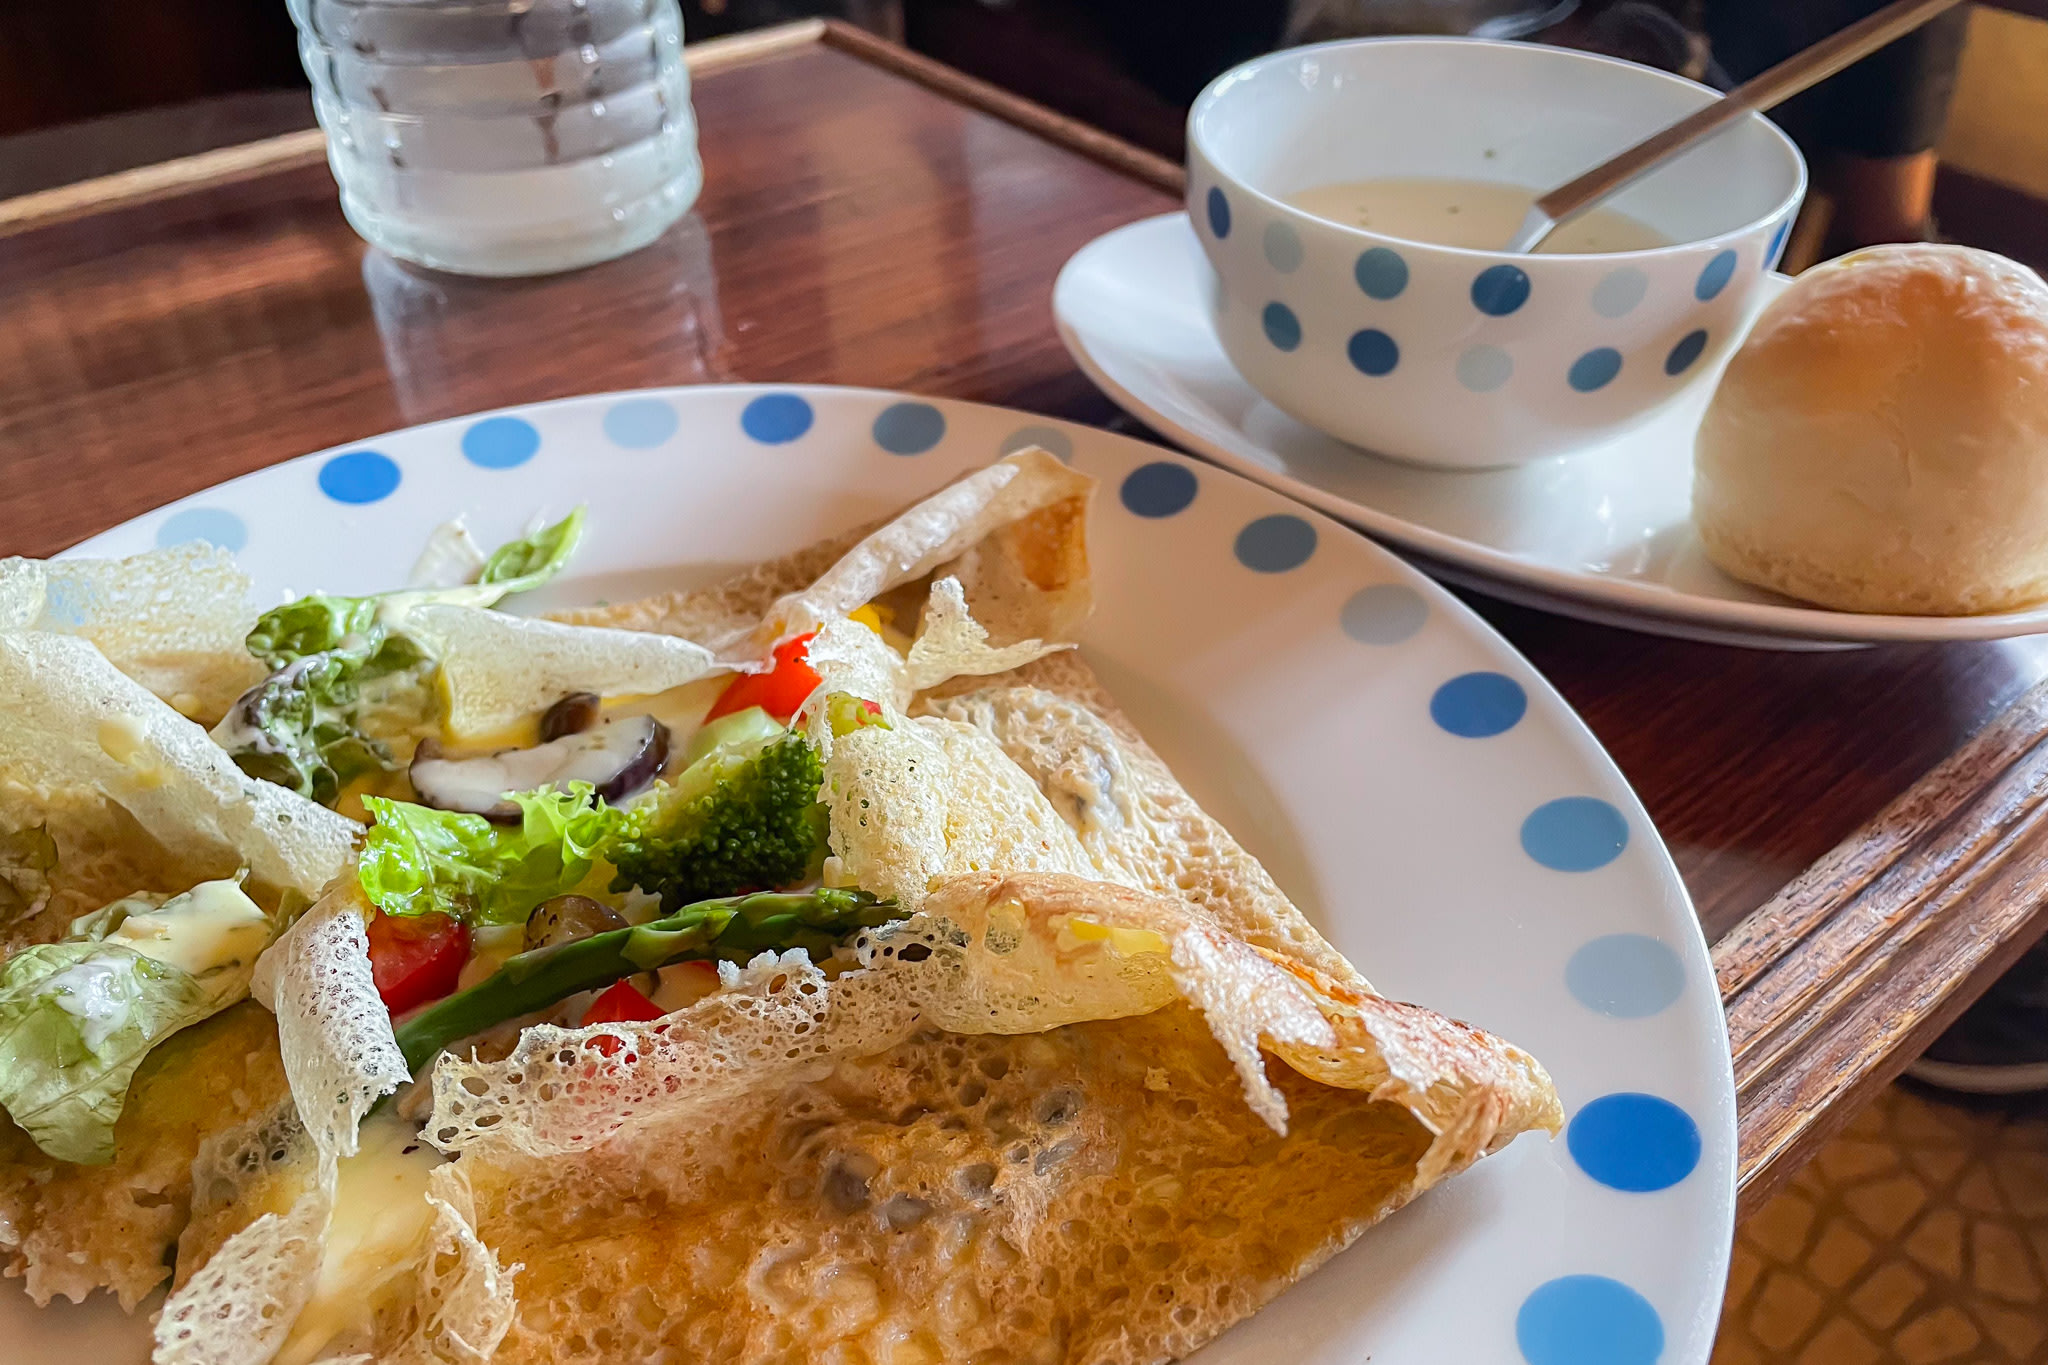 A galette (crepe dish filled with egg, cheese and vegetables) on a plate on a wooden table. Behind it is a small bowl of soup with a bread roll.